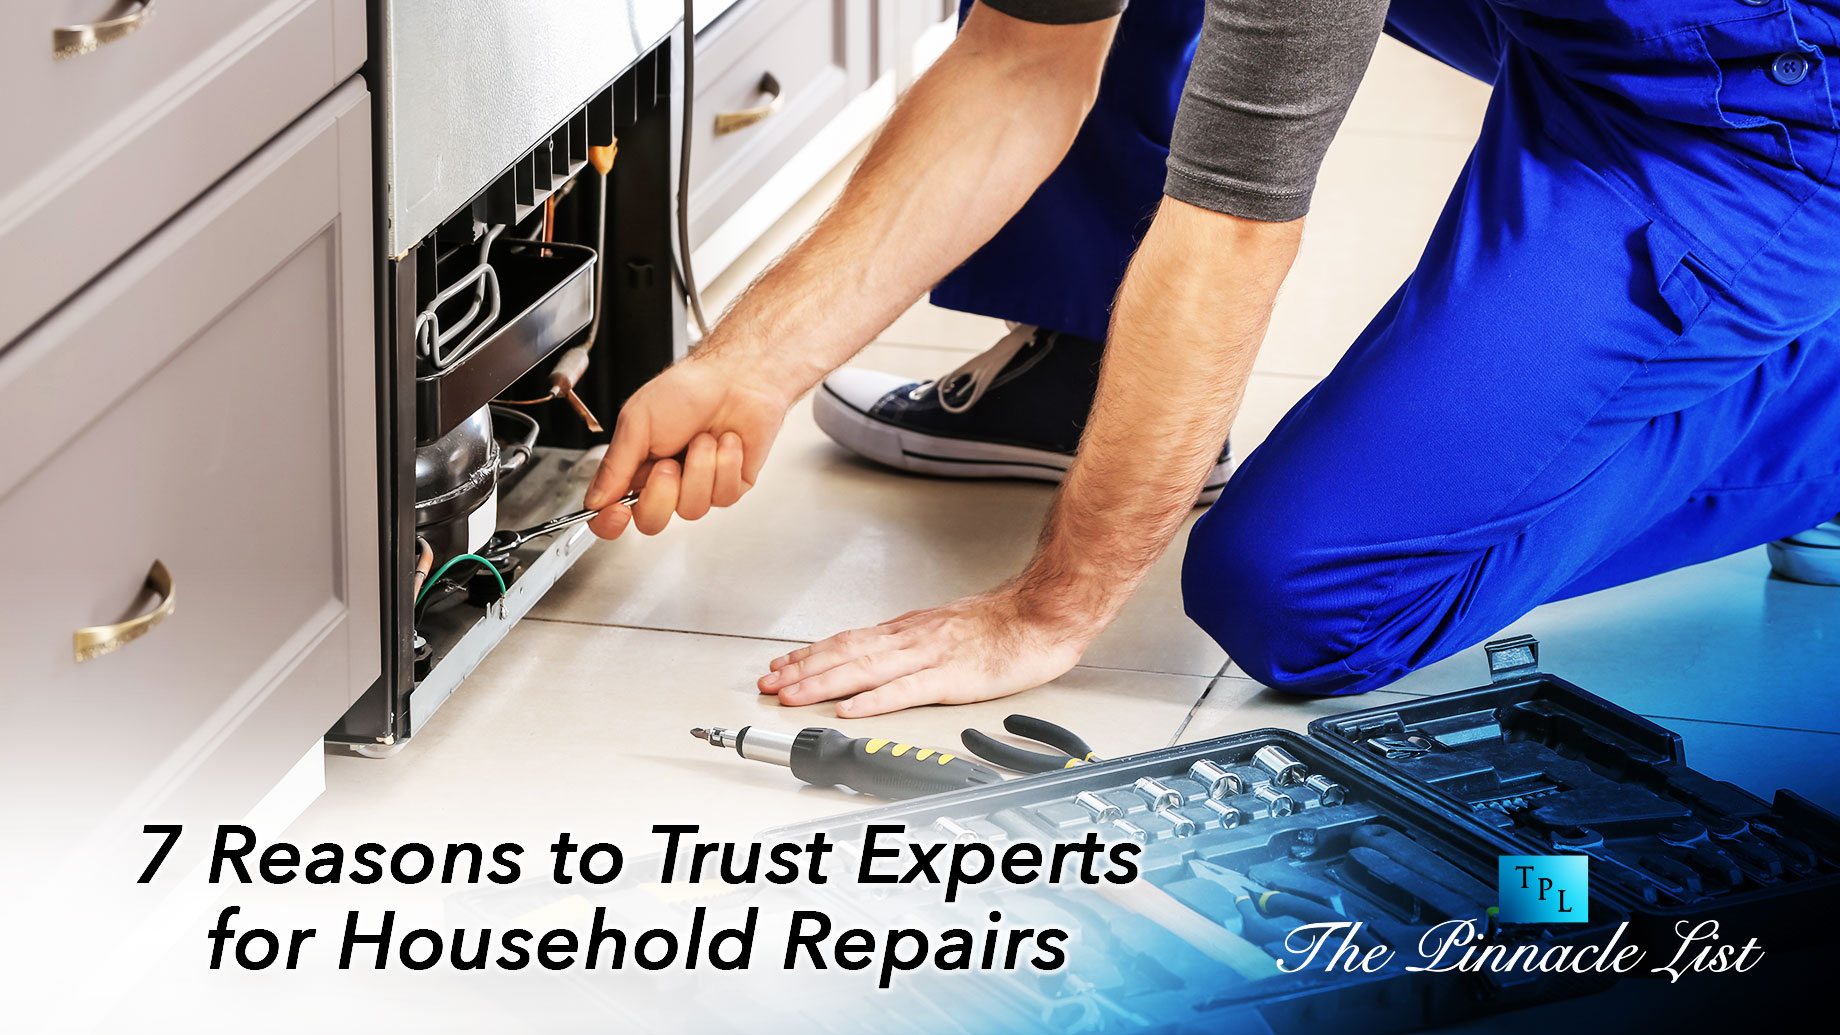 7 Reasons to Trust Experts for Household Repairs